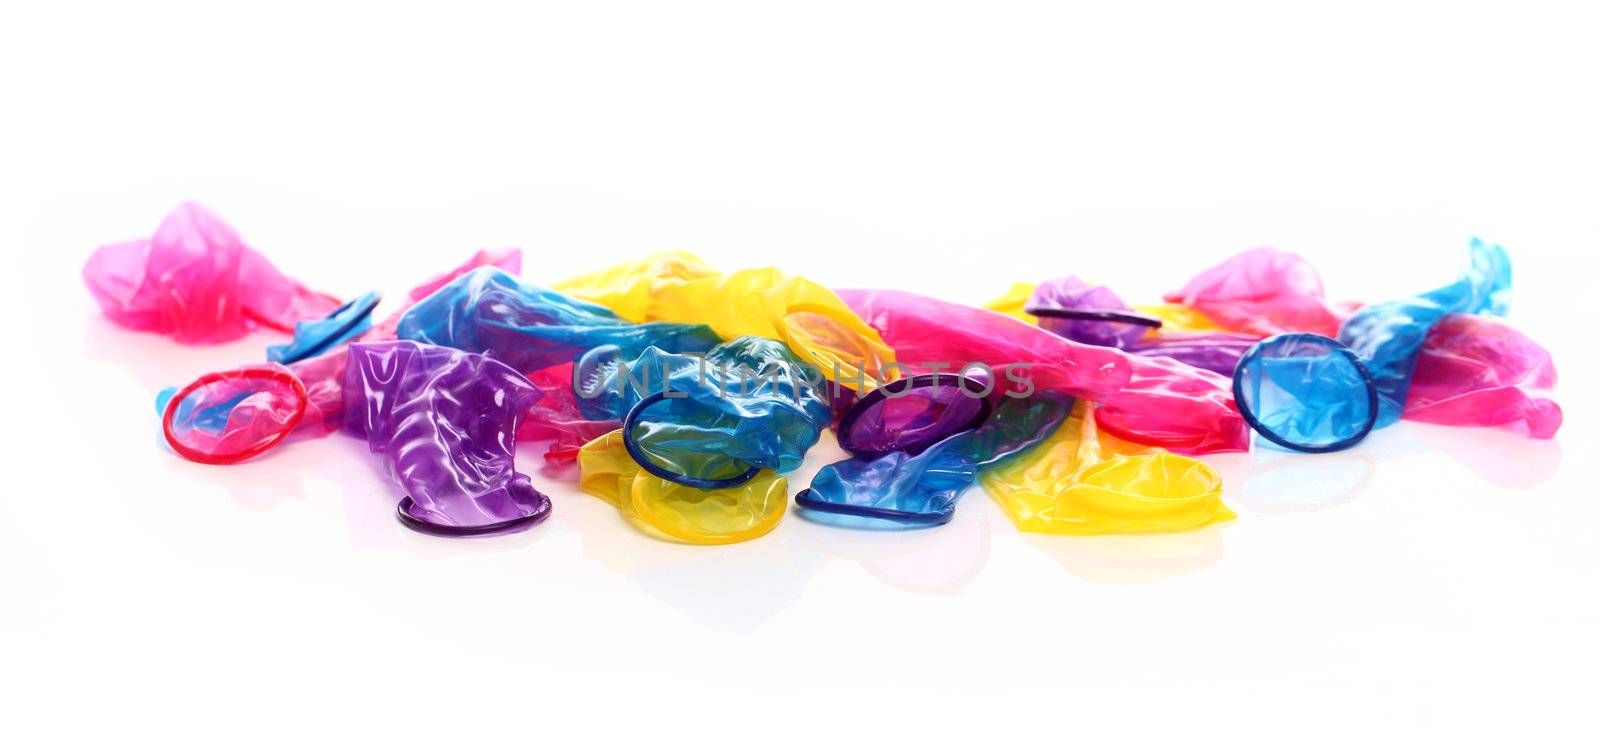 Image of used colorful condoms on a white background